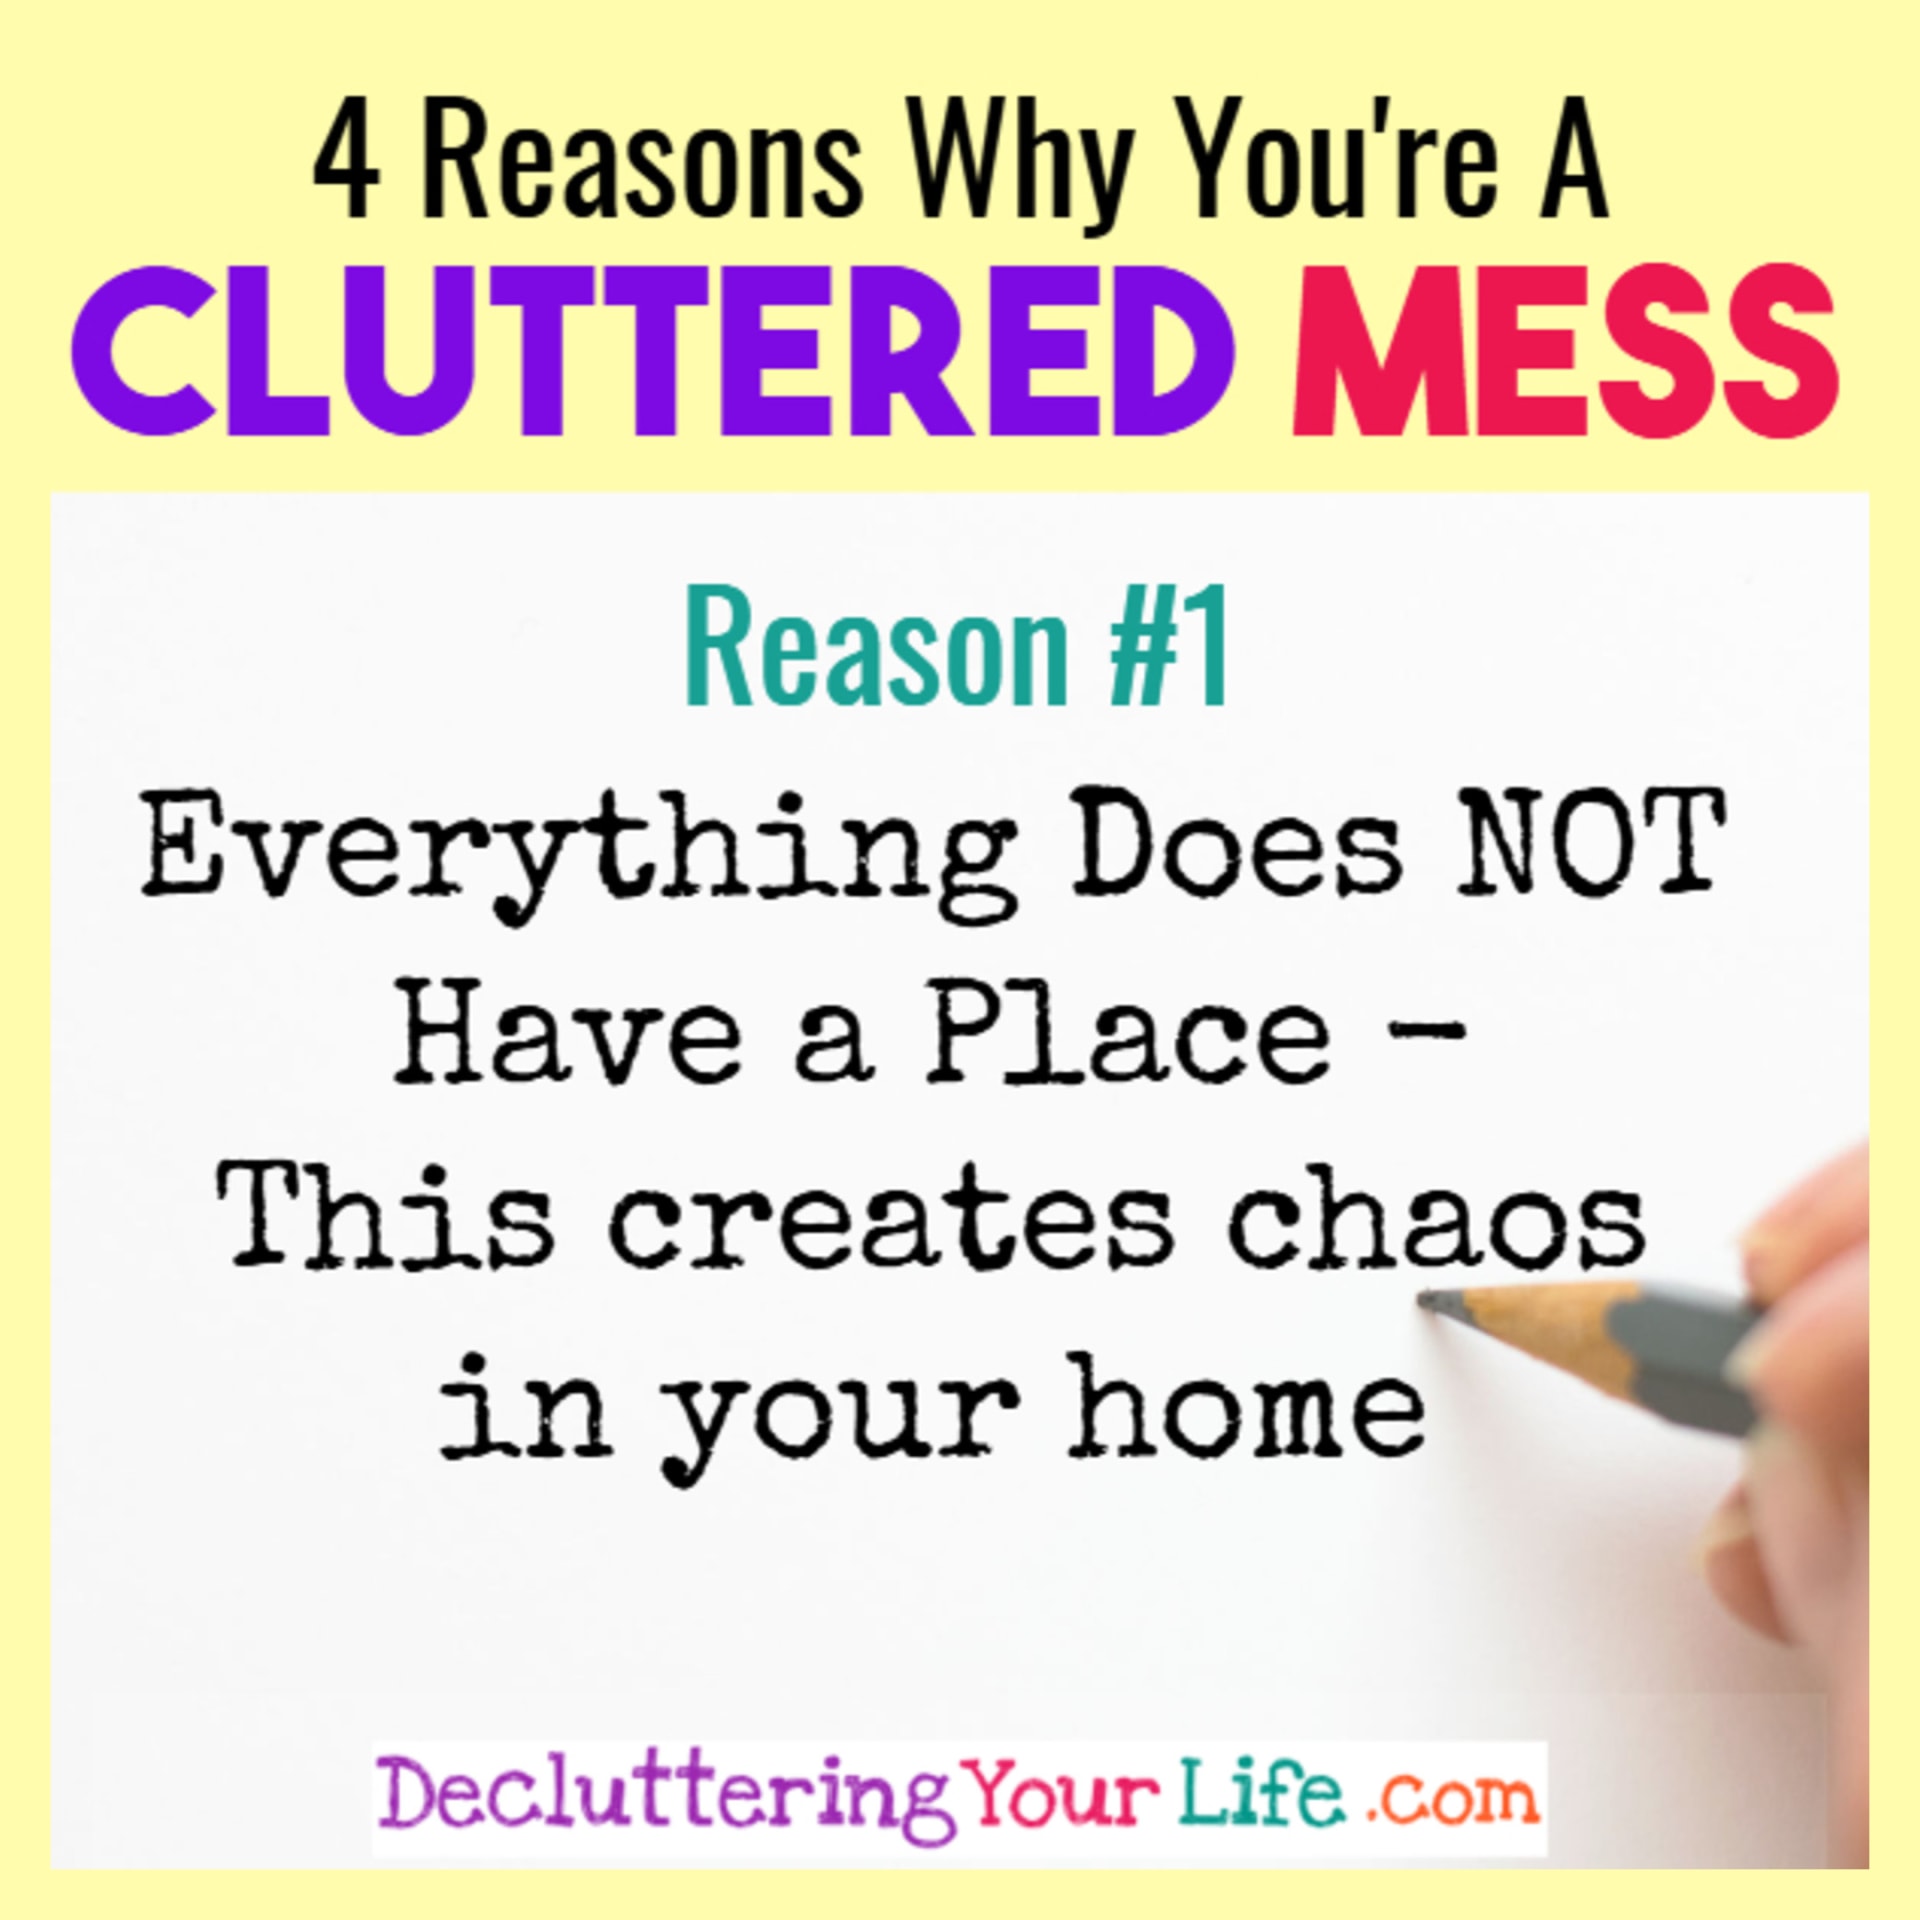 cluttered mess reason 1